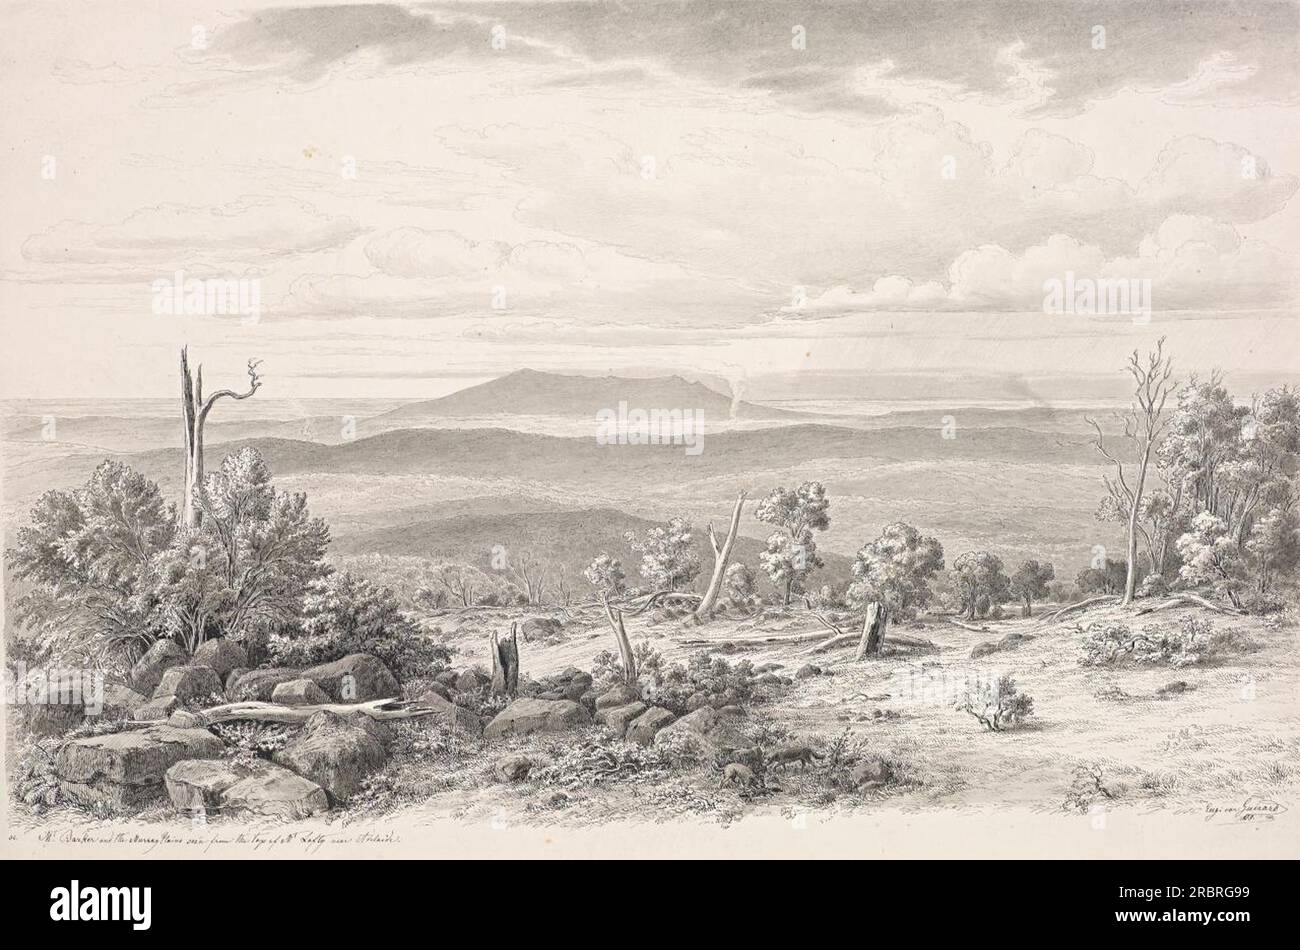 Mt Barker and the Murray plains seen from the top of Mt Lofty near Adelaide 1858 by Eugene von Guerard Stock Photo